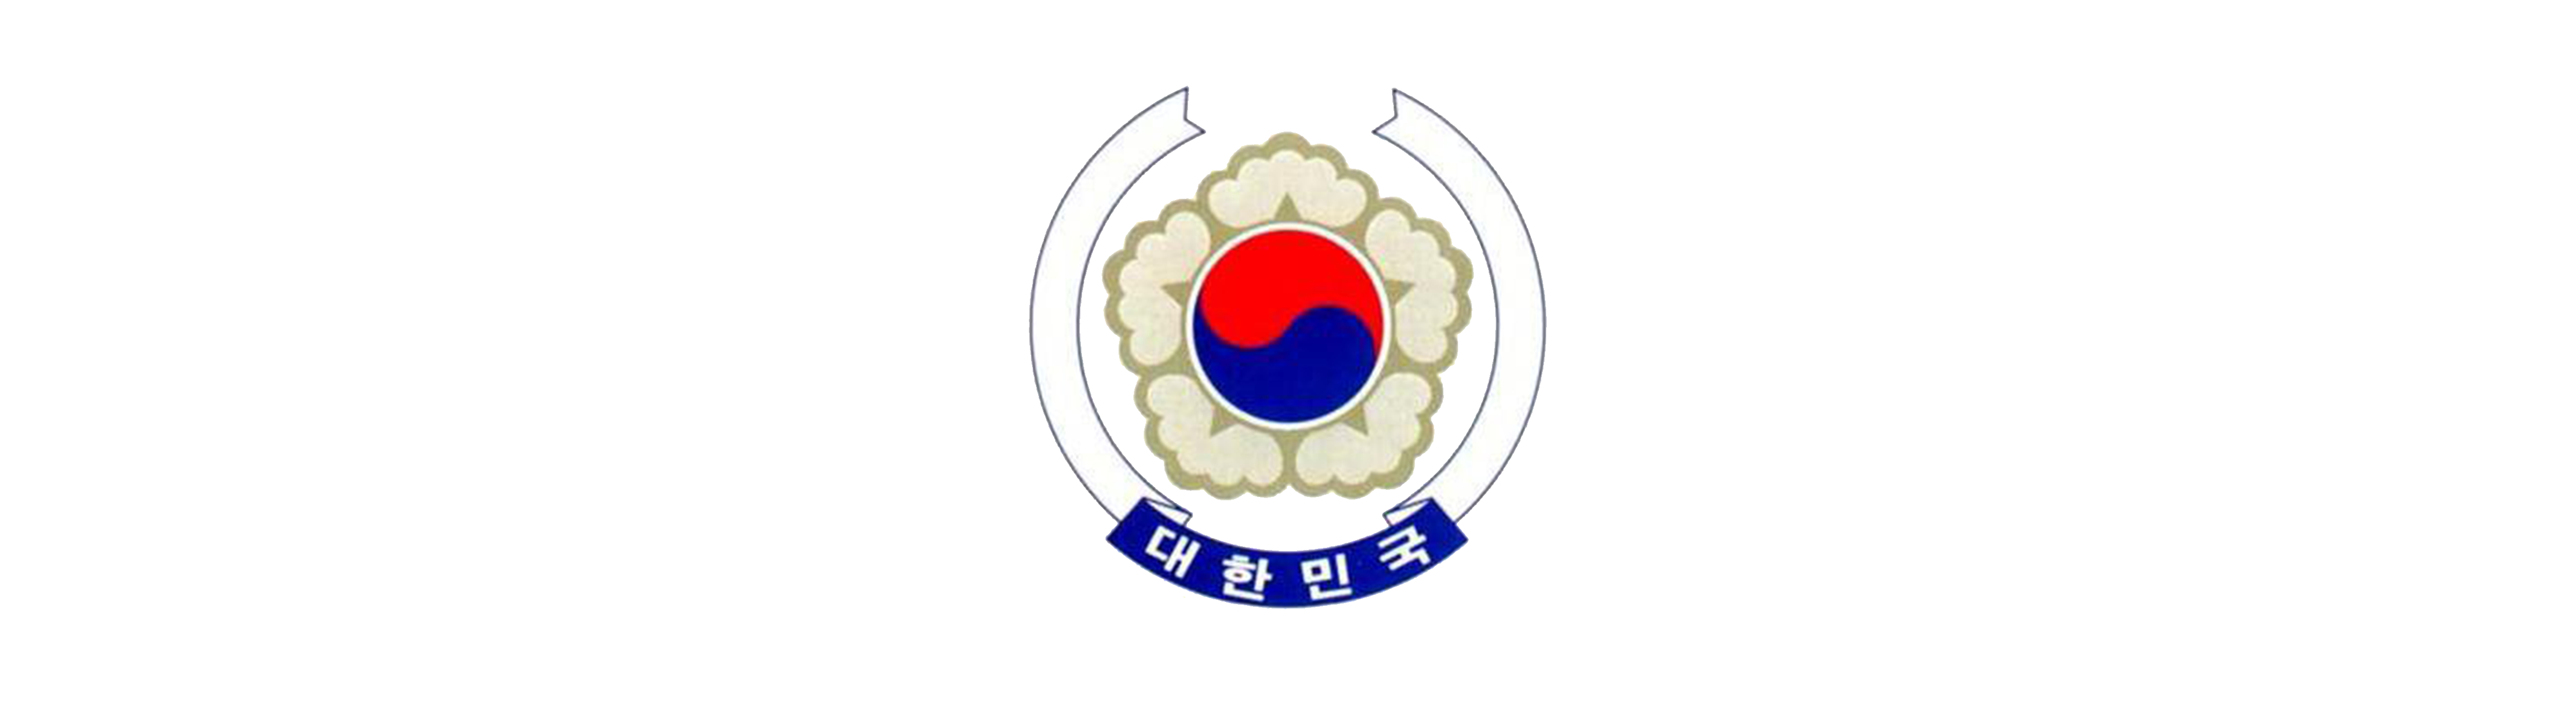 Embassy of the Republic of Korea in the Republic of the Philippines Logo